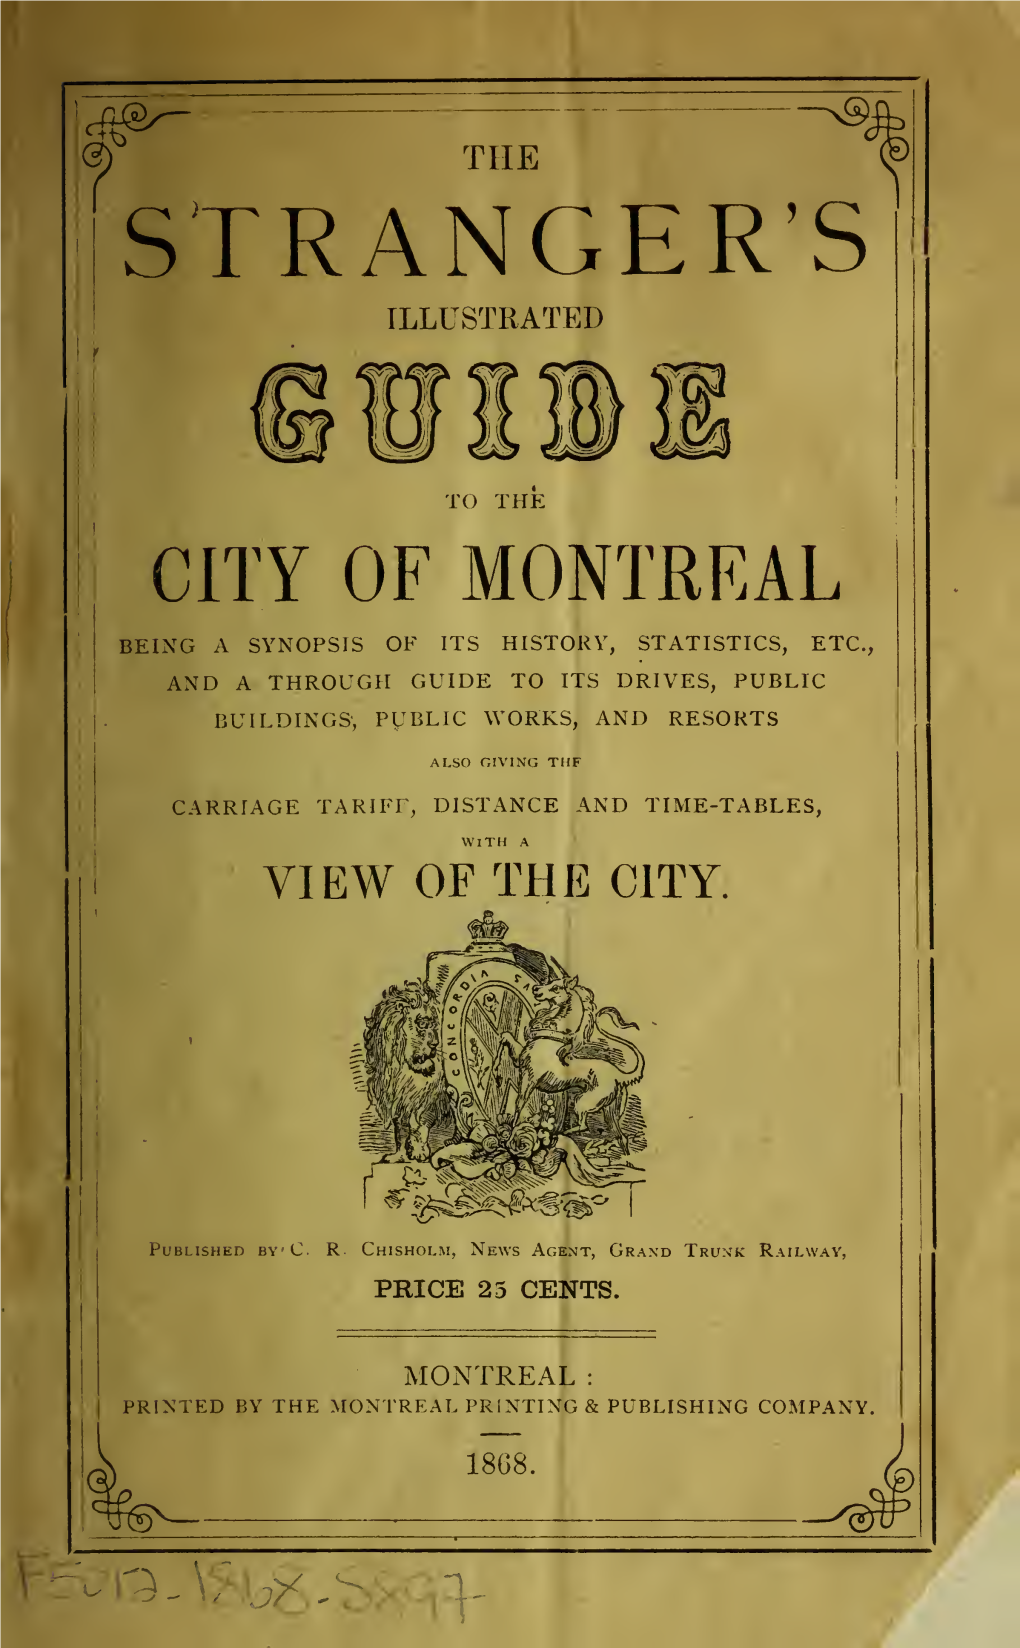 The Stranger's Illustrated Guide to the City of Montreal